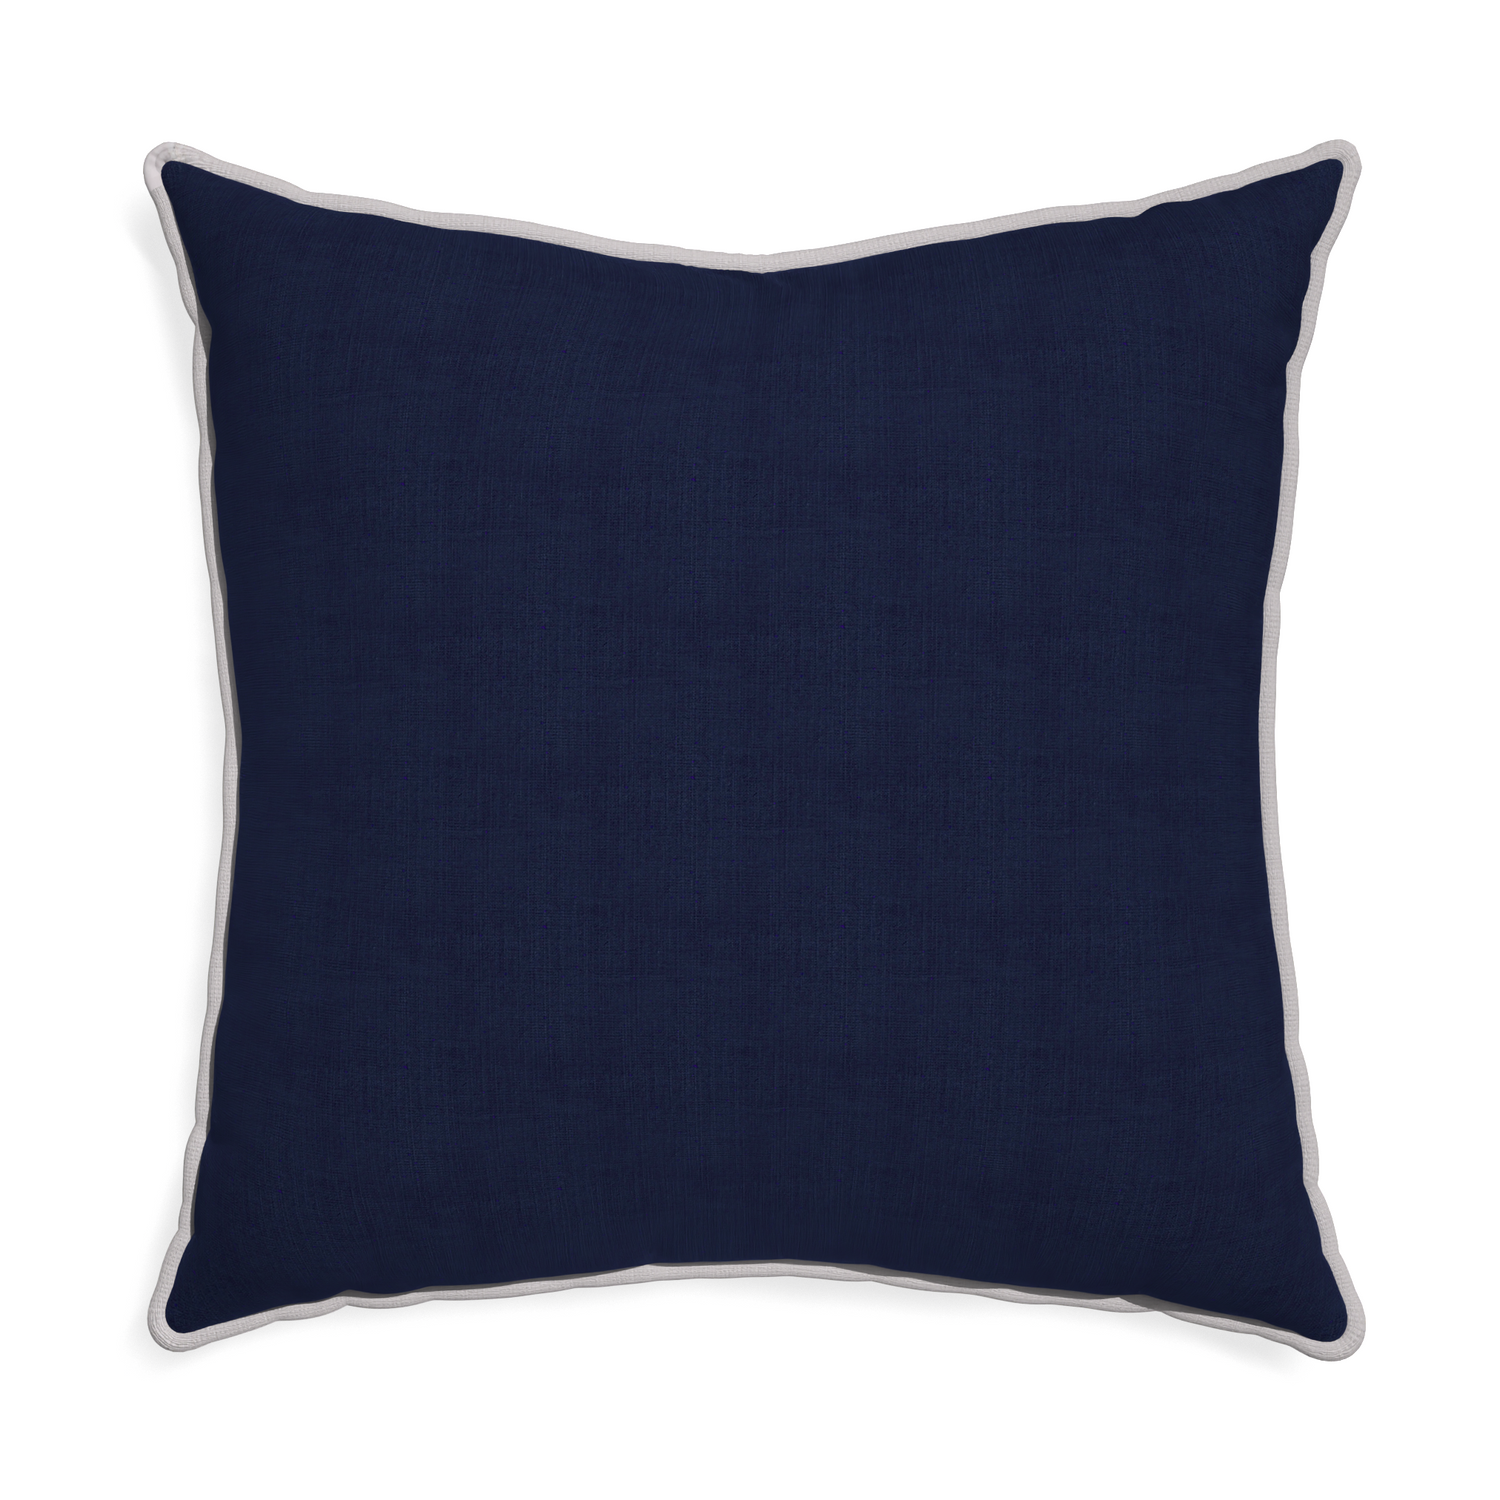 Euro-sham midnight custom navy bluepillow with pebble piping on white background